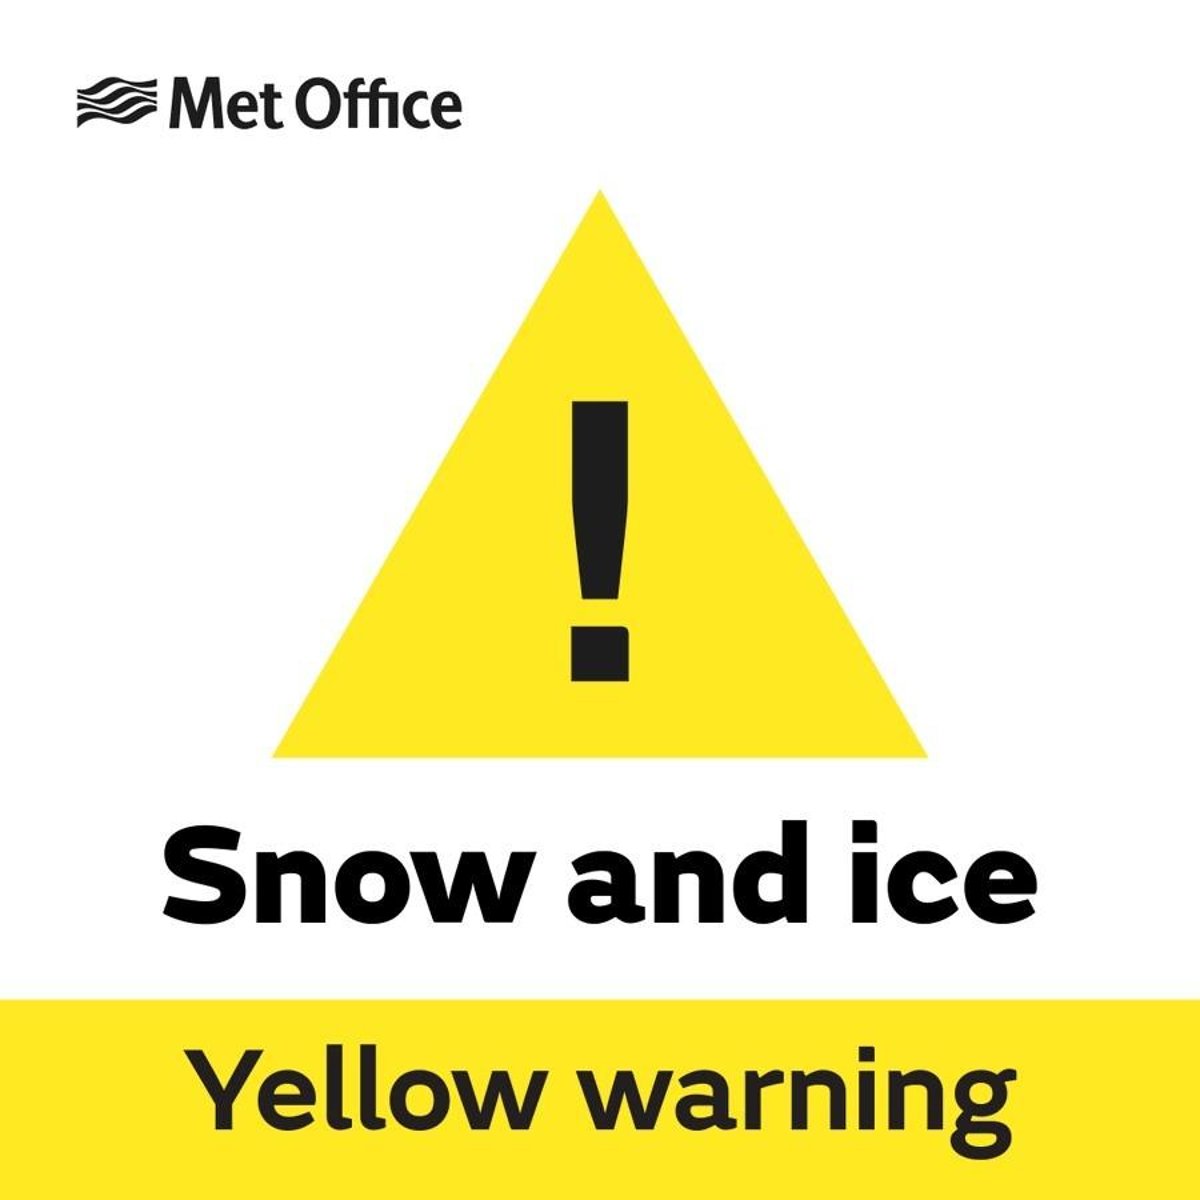 Met Office Yellow weather warning for snow and ice in Northern Ireland - up to 15 cm snow possible on higher ground